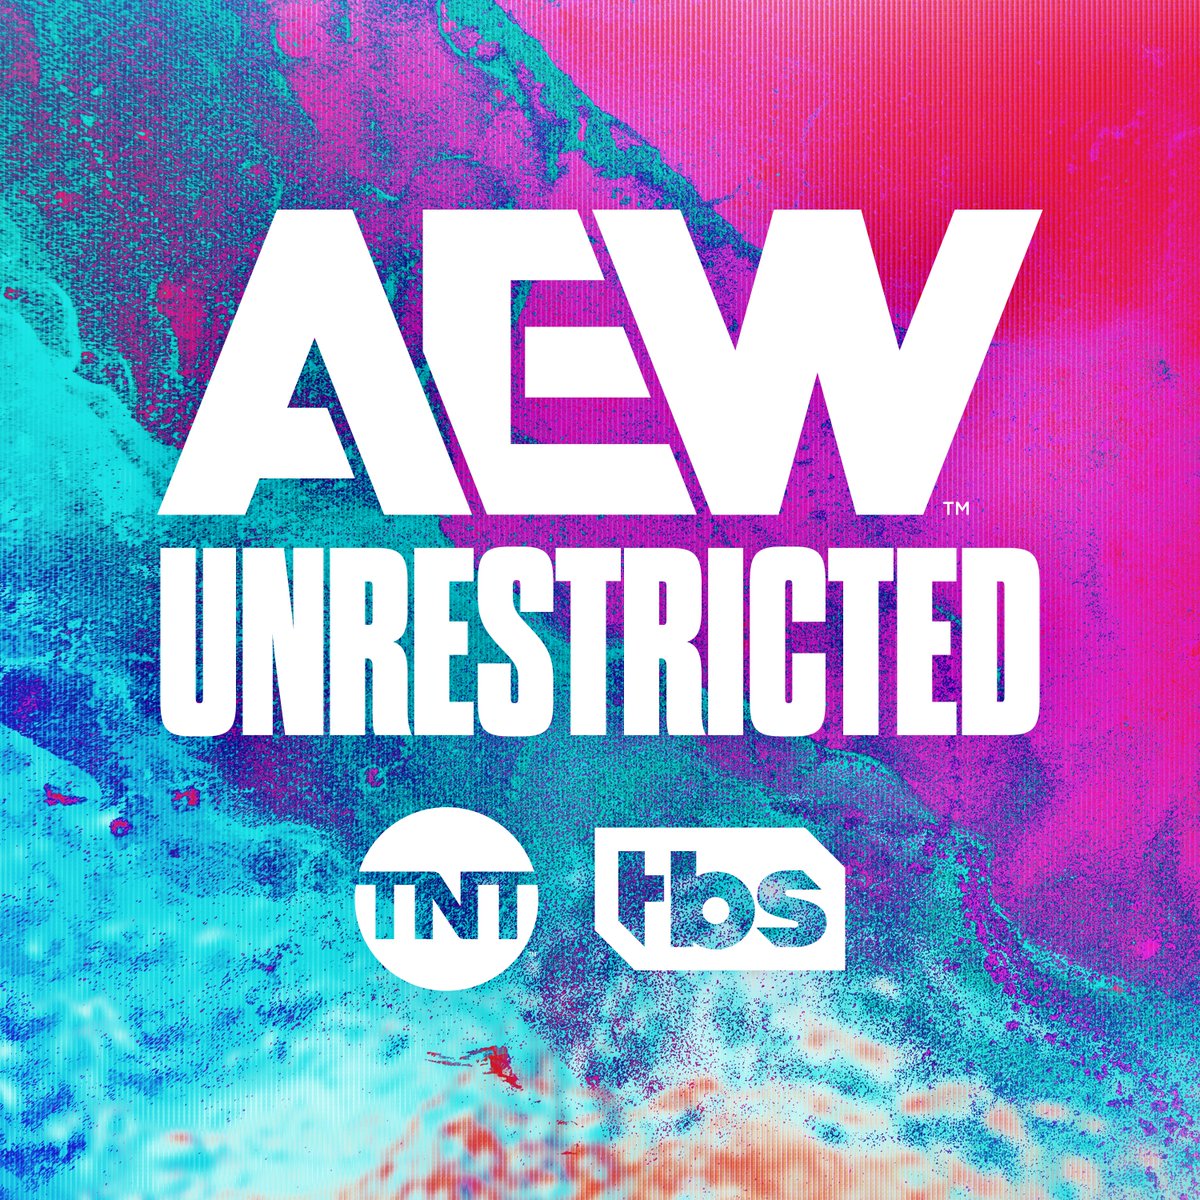 #AEWUnrestricted this week is all about #AEWDynasty! @WillWashington and I break down Sunday's stacked card & chat with @swerveconfident and @willowwrestles about their matches. We also receive a special message from a timeless individual. Listen now! link.chtbl.com/AEW